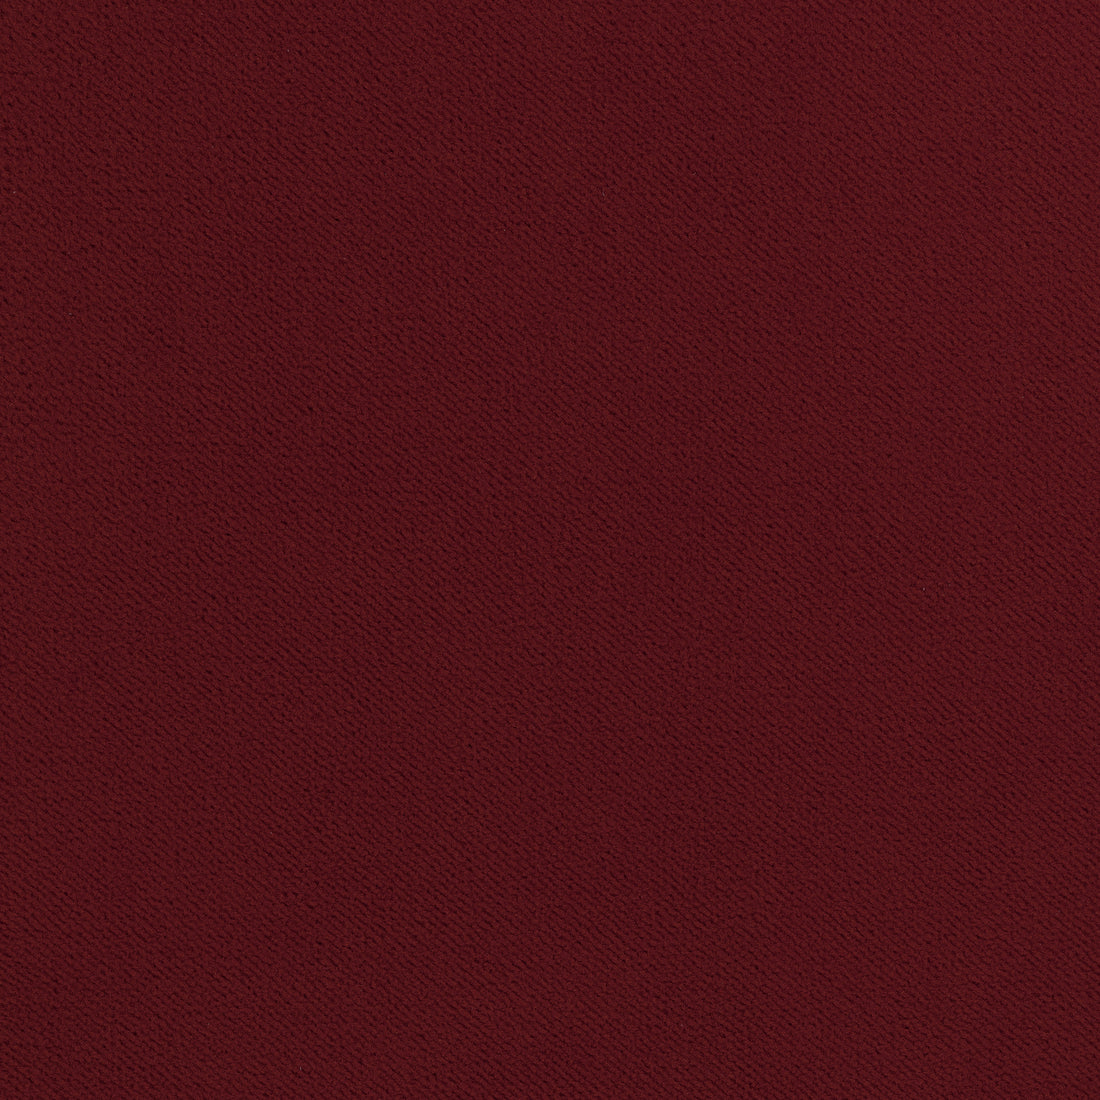 Club Velvet fabric in merlot color - pattern number W7210 - by Thibaut in the Club Velvet collection